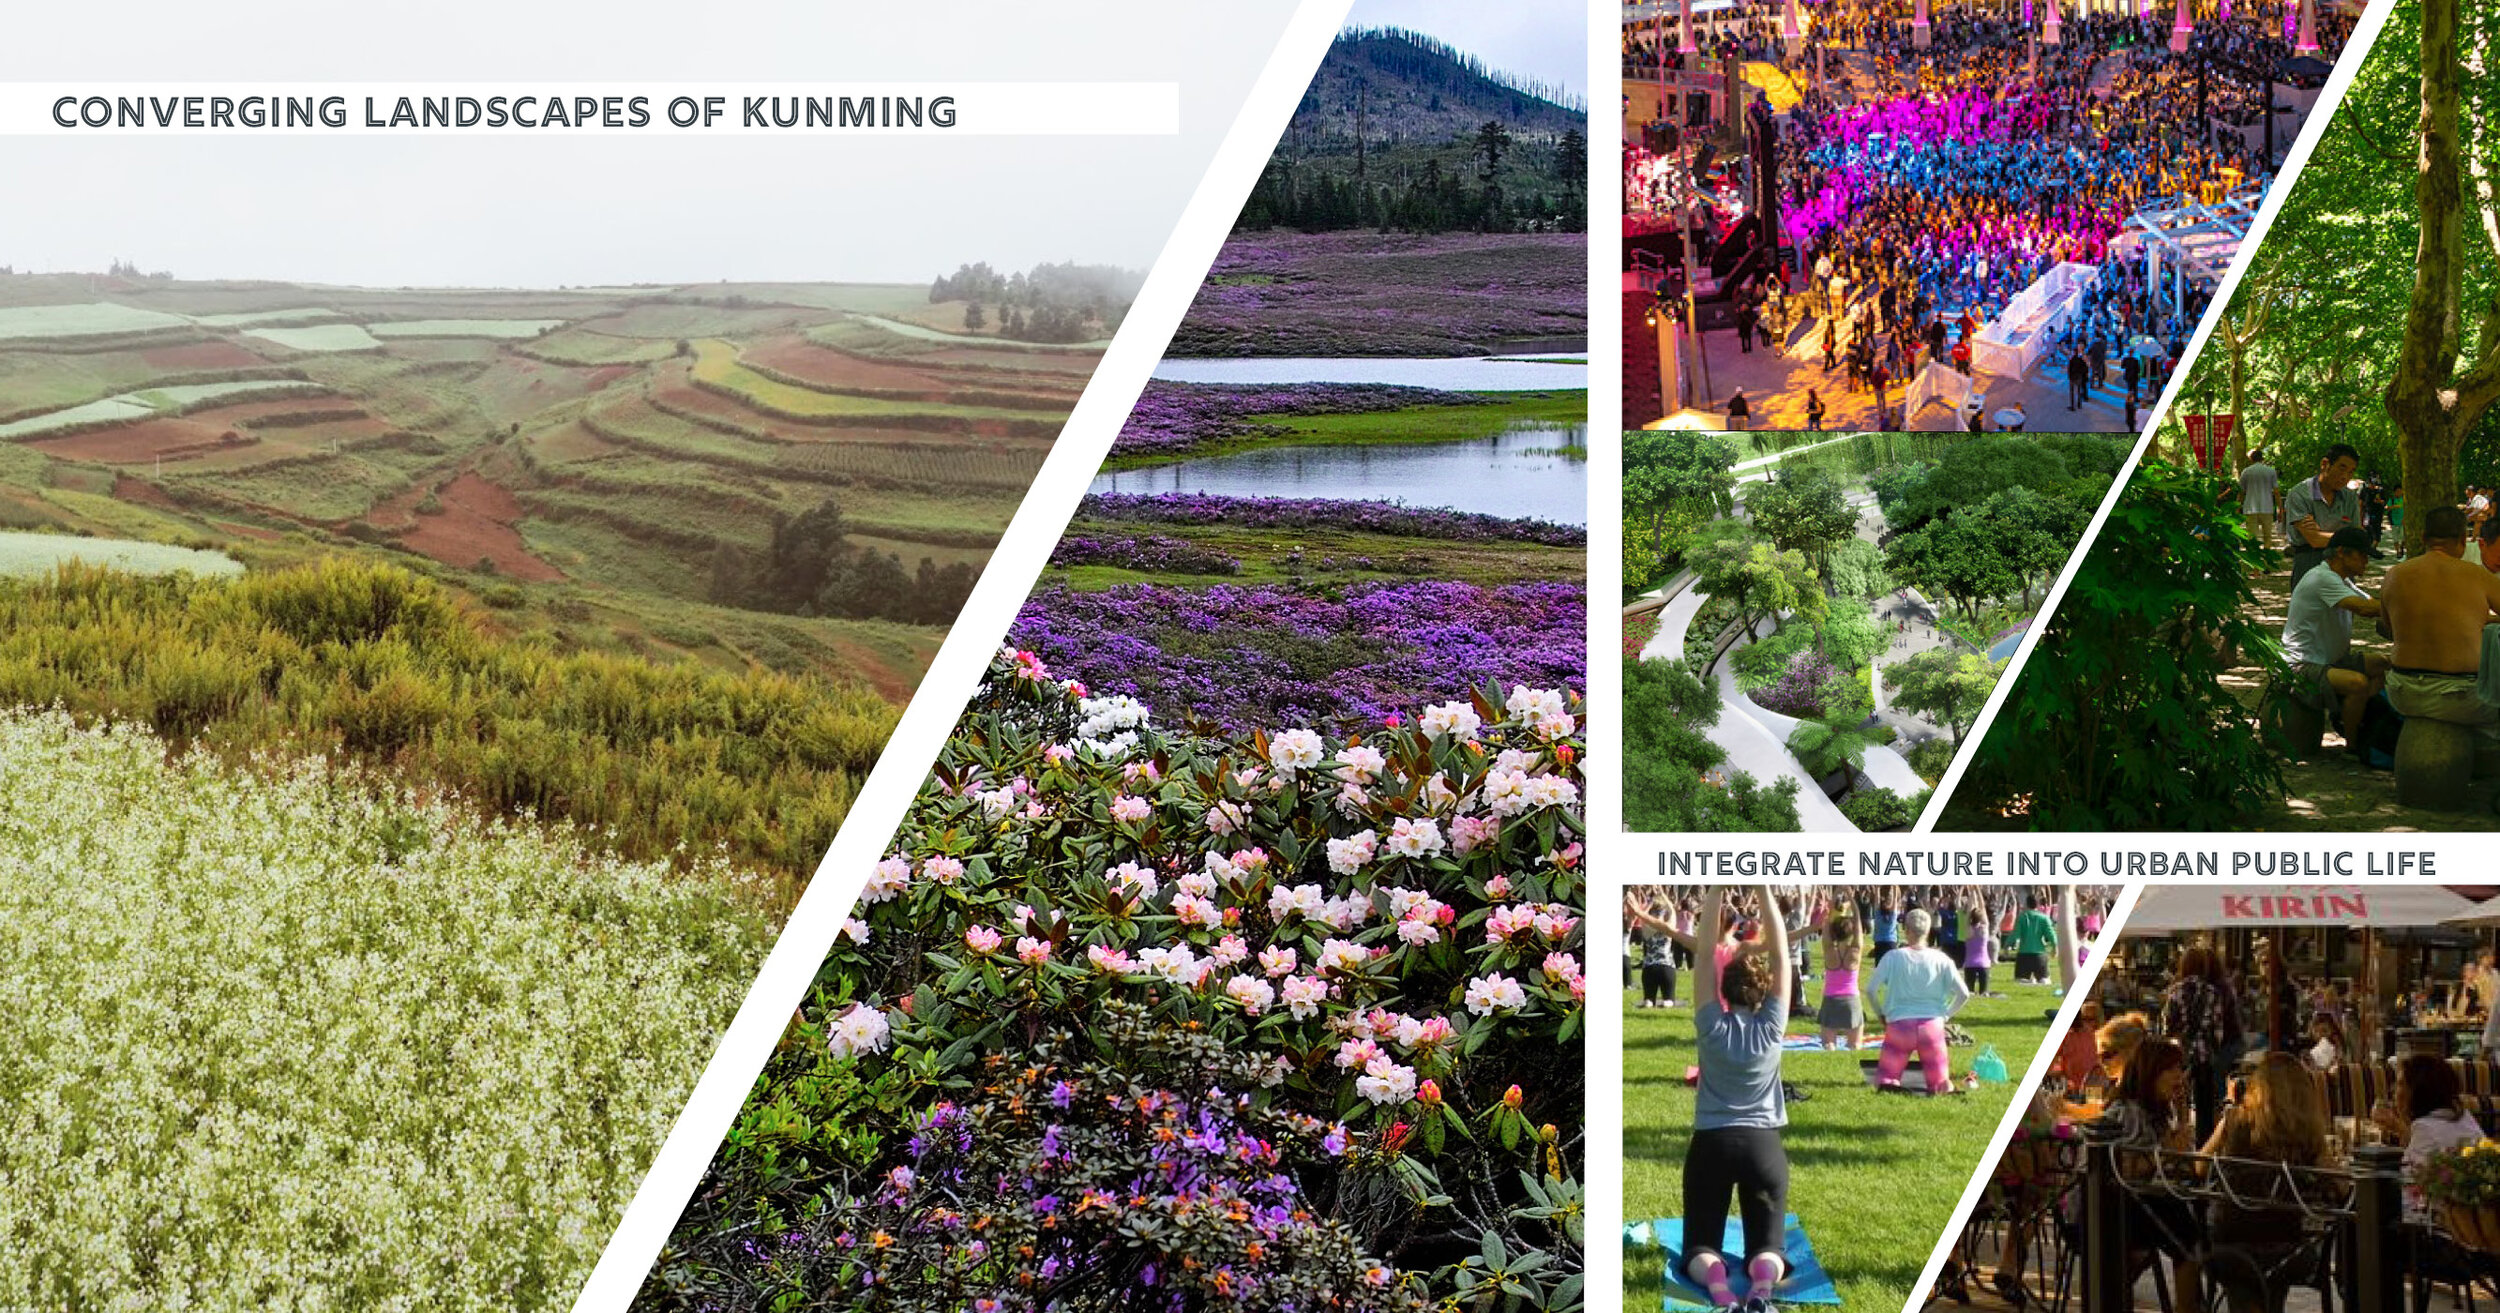  Kunming is known as the “City of Eternal Spring.” The team utilized past experience in the city and research to yield programmatic and landscape elements during the concept stage.    (Conceptual reference imagery above) 